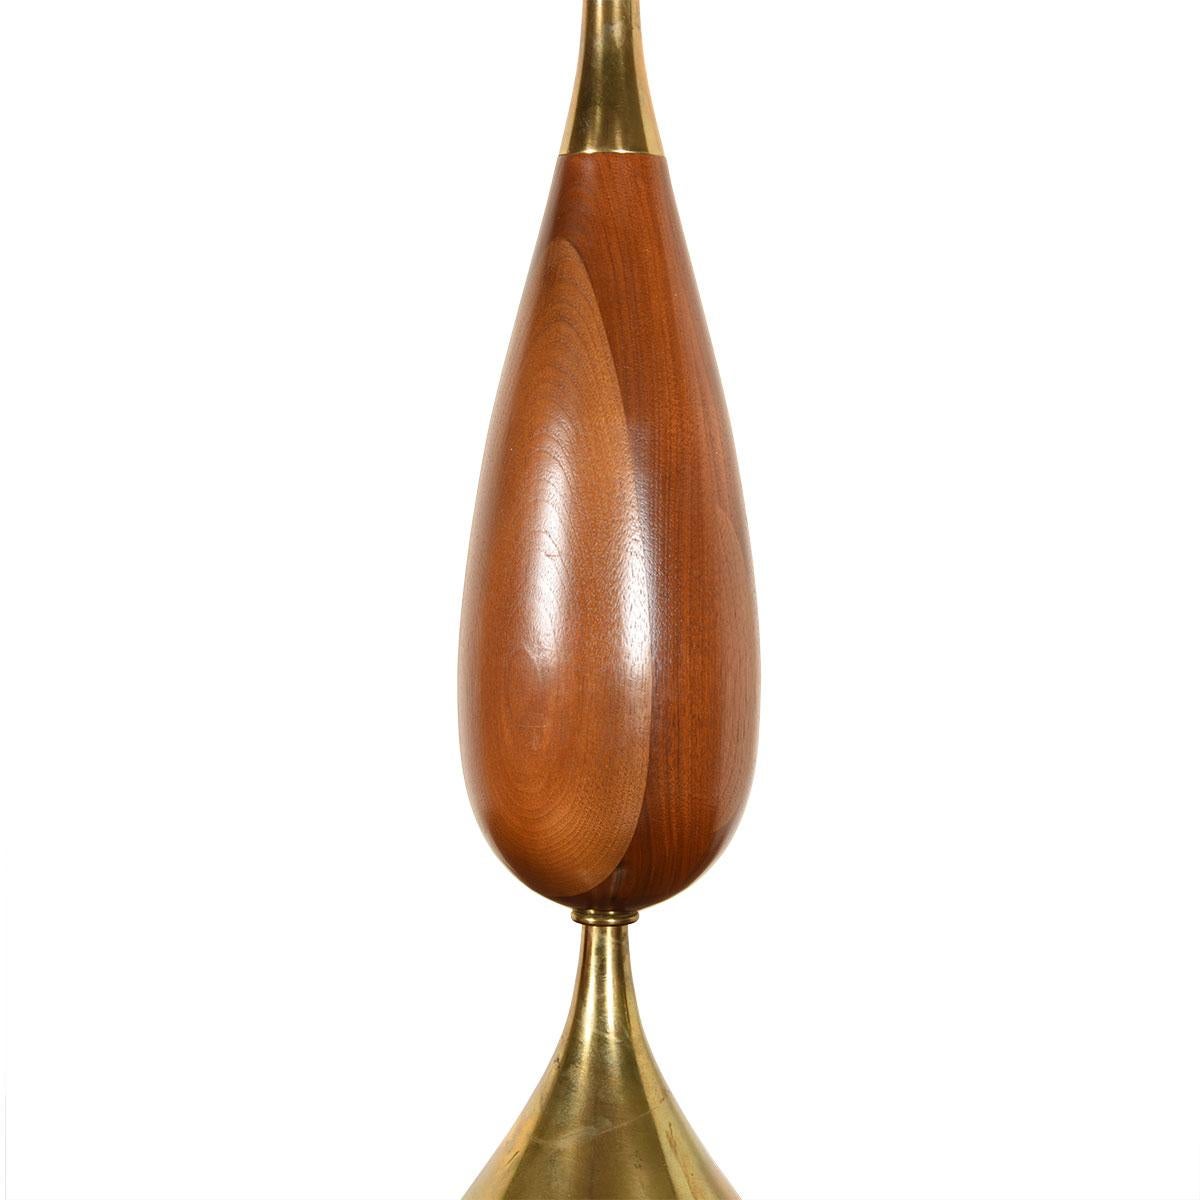 Midcentury Tall Walnut & Brass Table Lamp by Tony Paul for Westwood

Additional information:
Material: Walnut, Brass
Featured at Kensington

Dimension: Ø 7? x H 32.5? to top of socket.